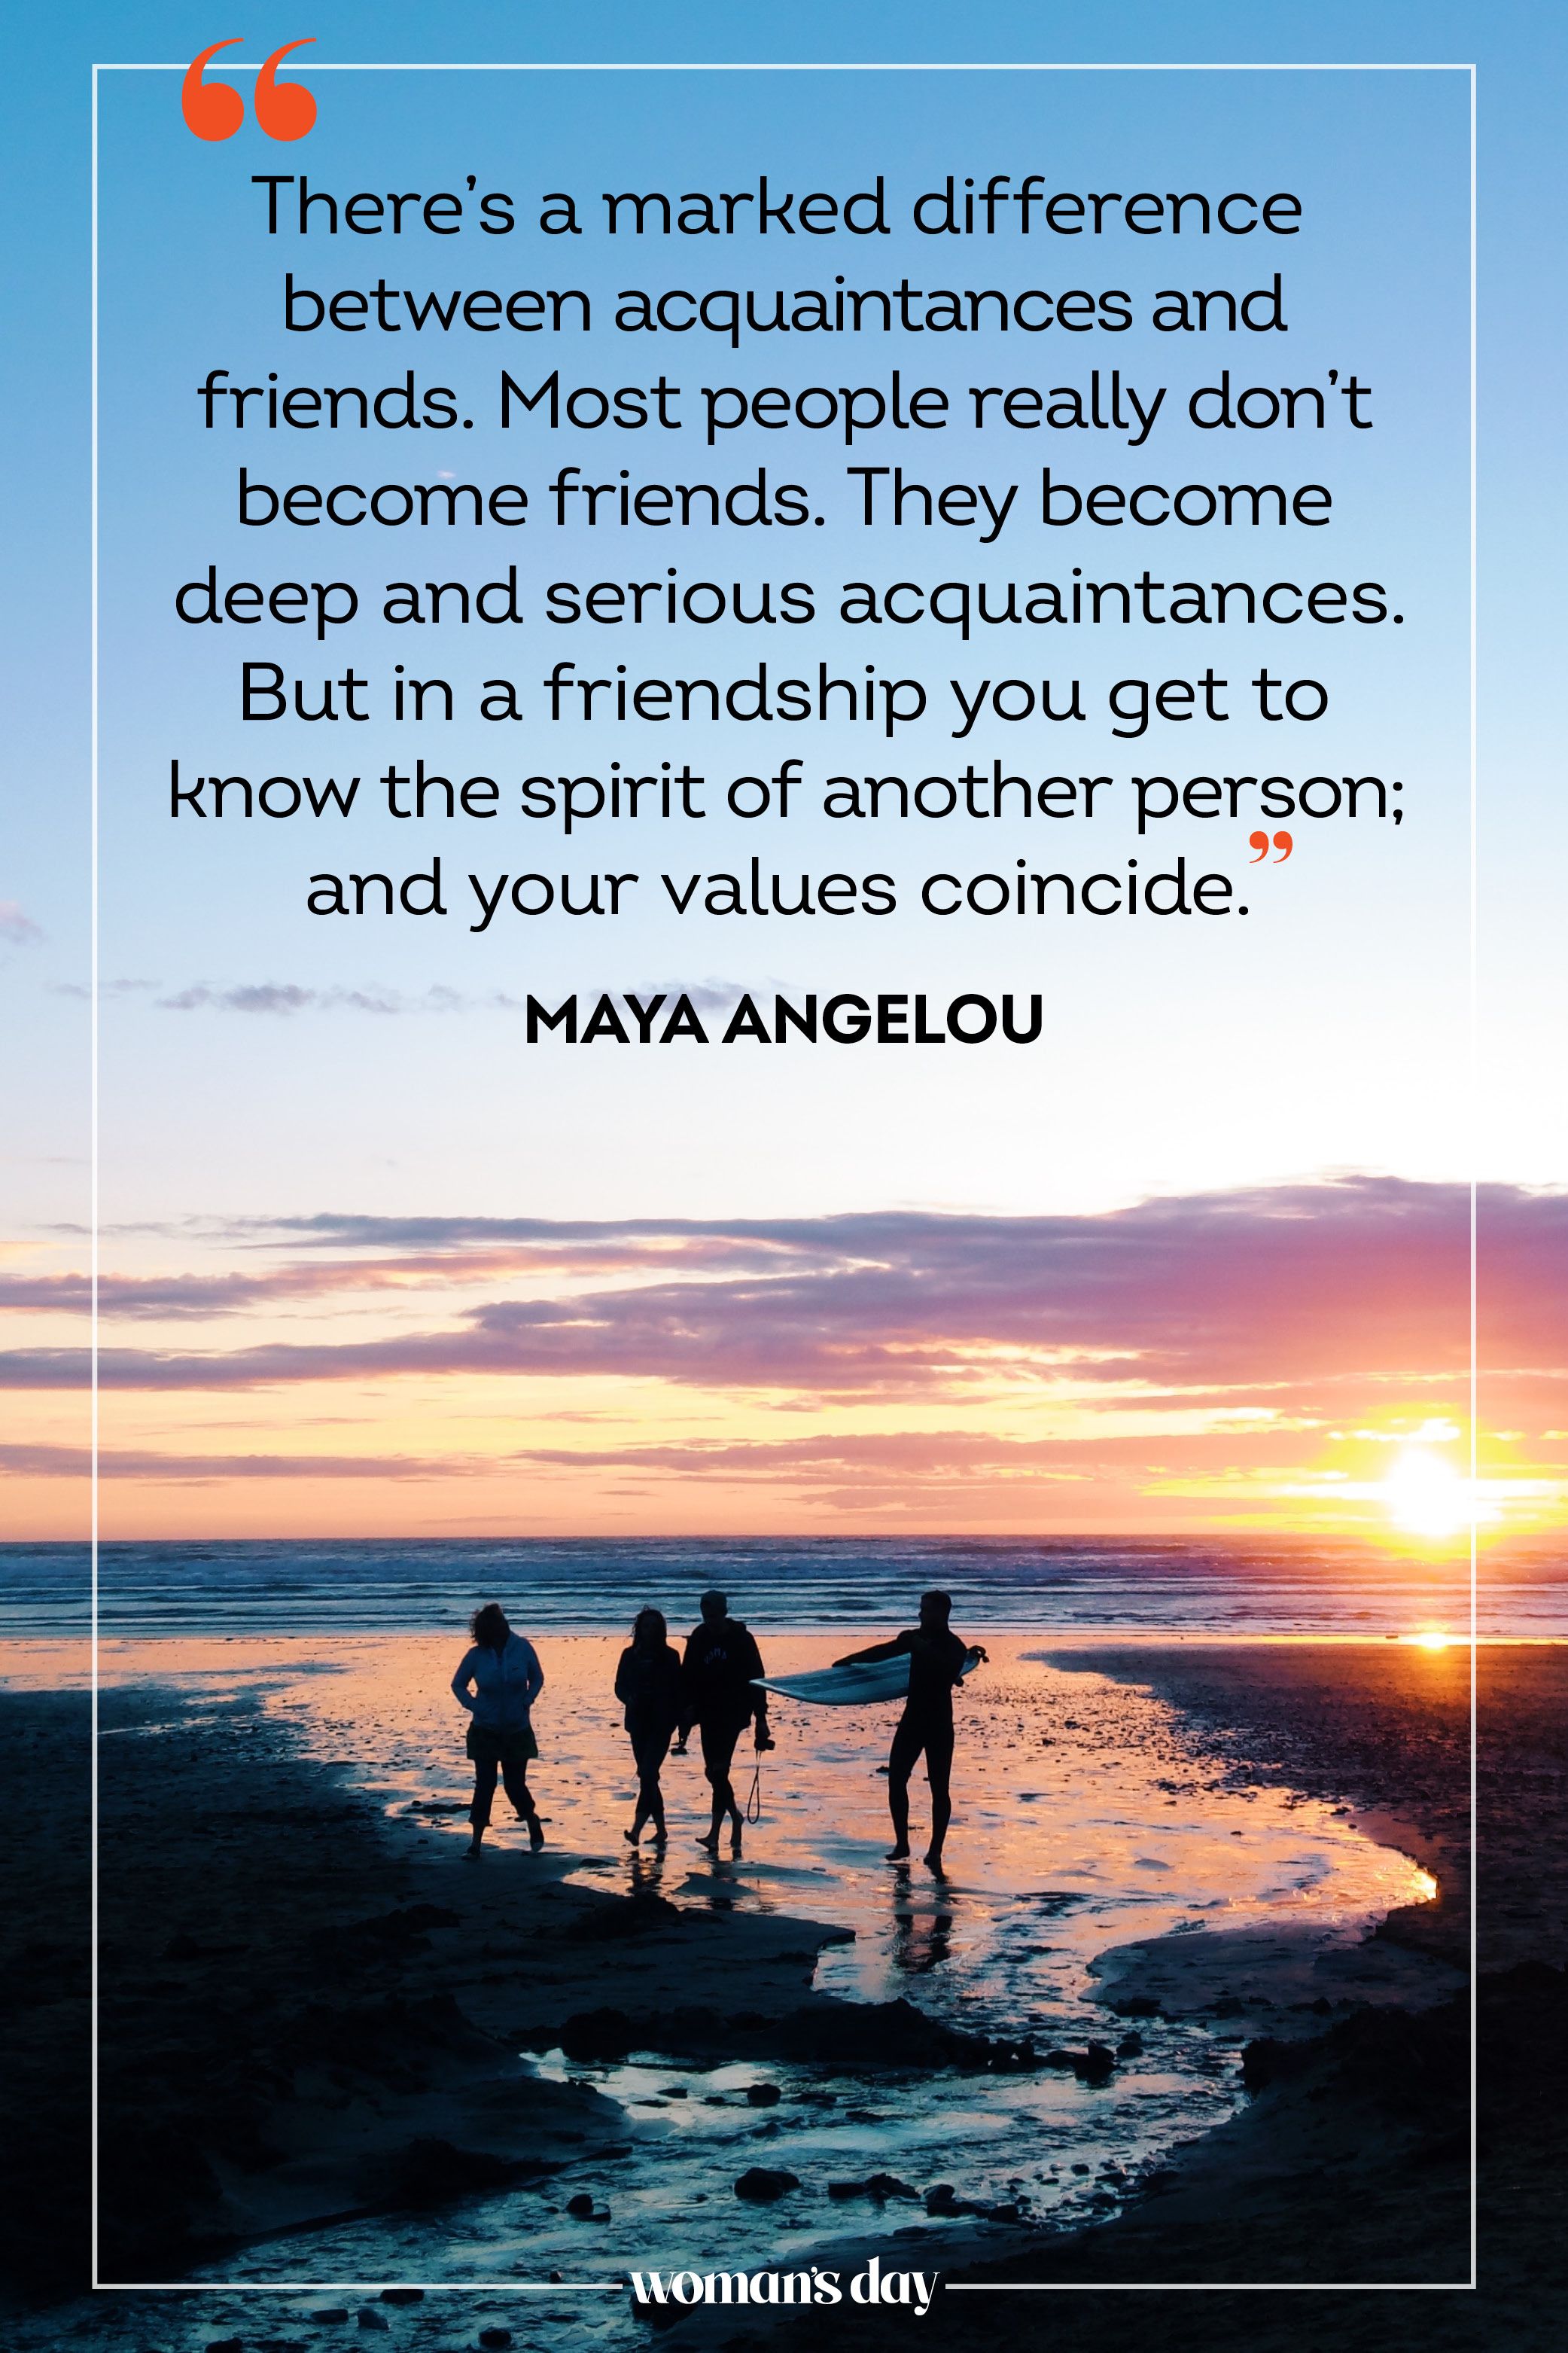 quotes about friends being like family